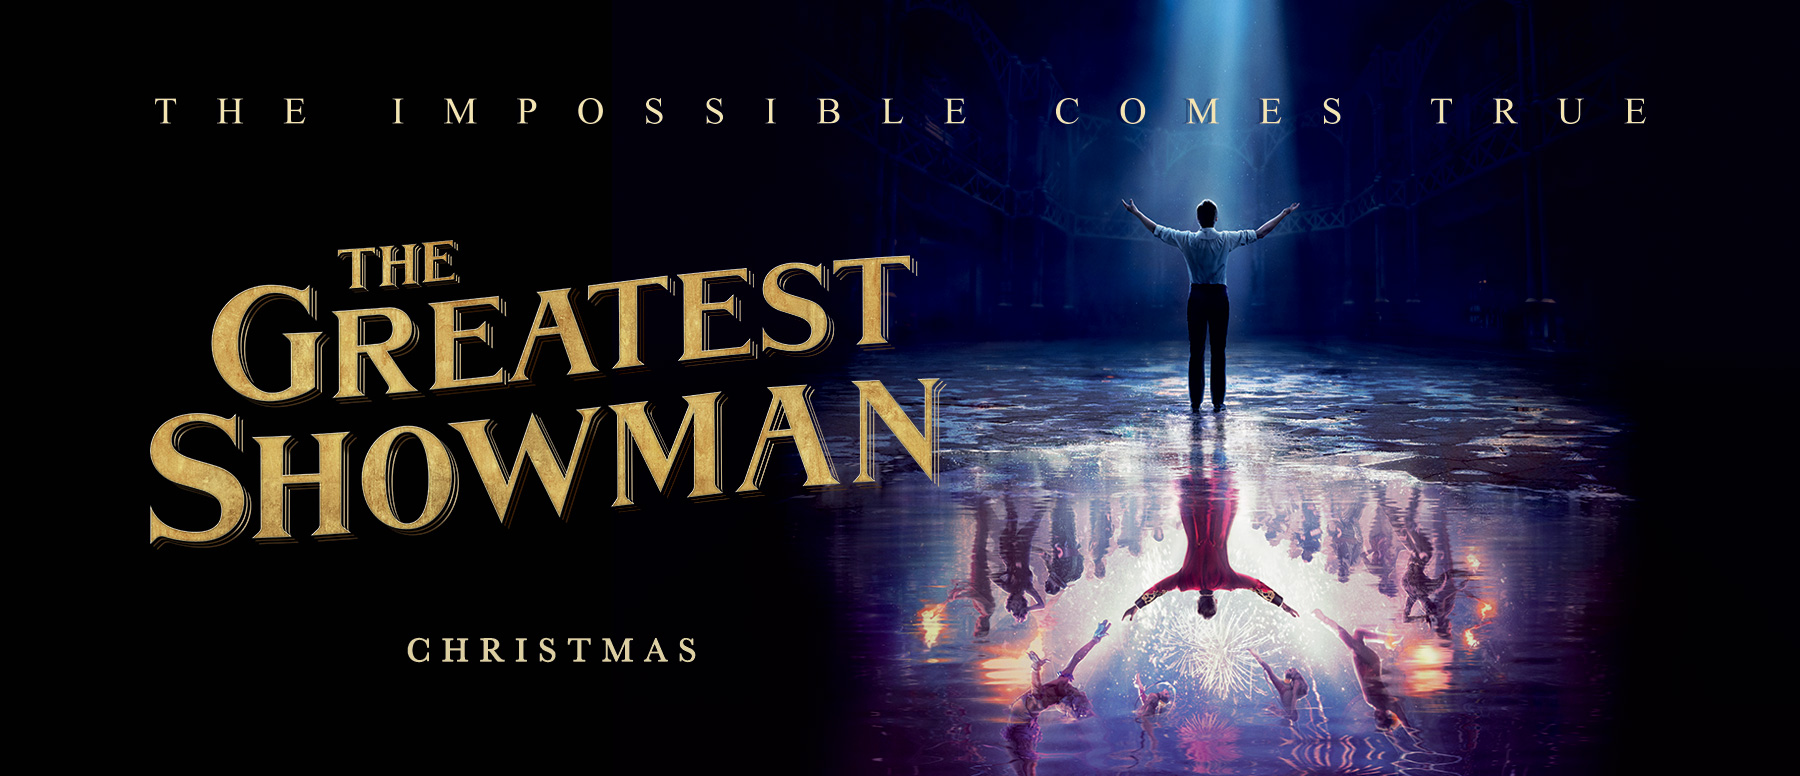 New trailer for 'THE GREATEST SHOWMAN' faces the music